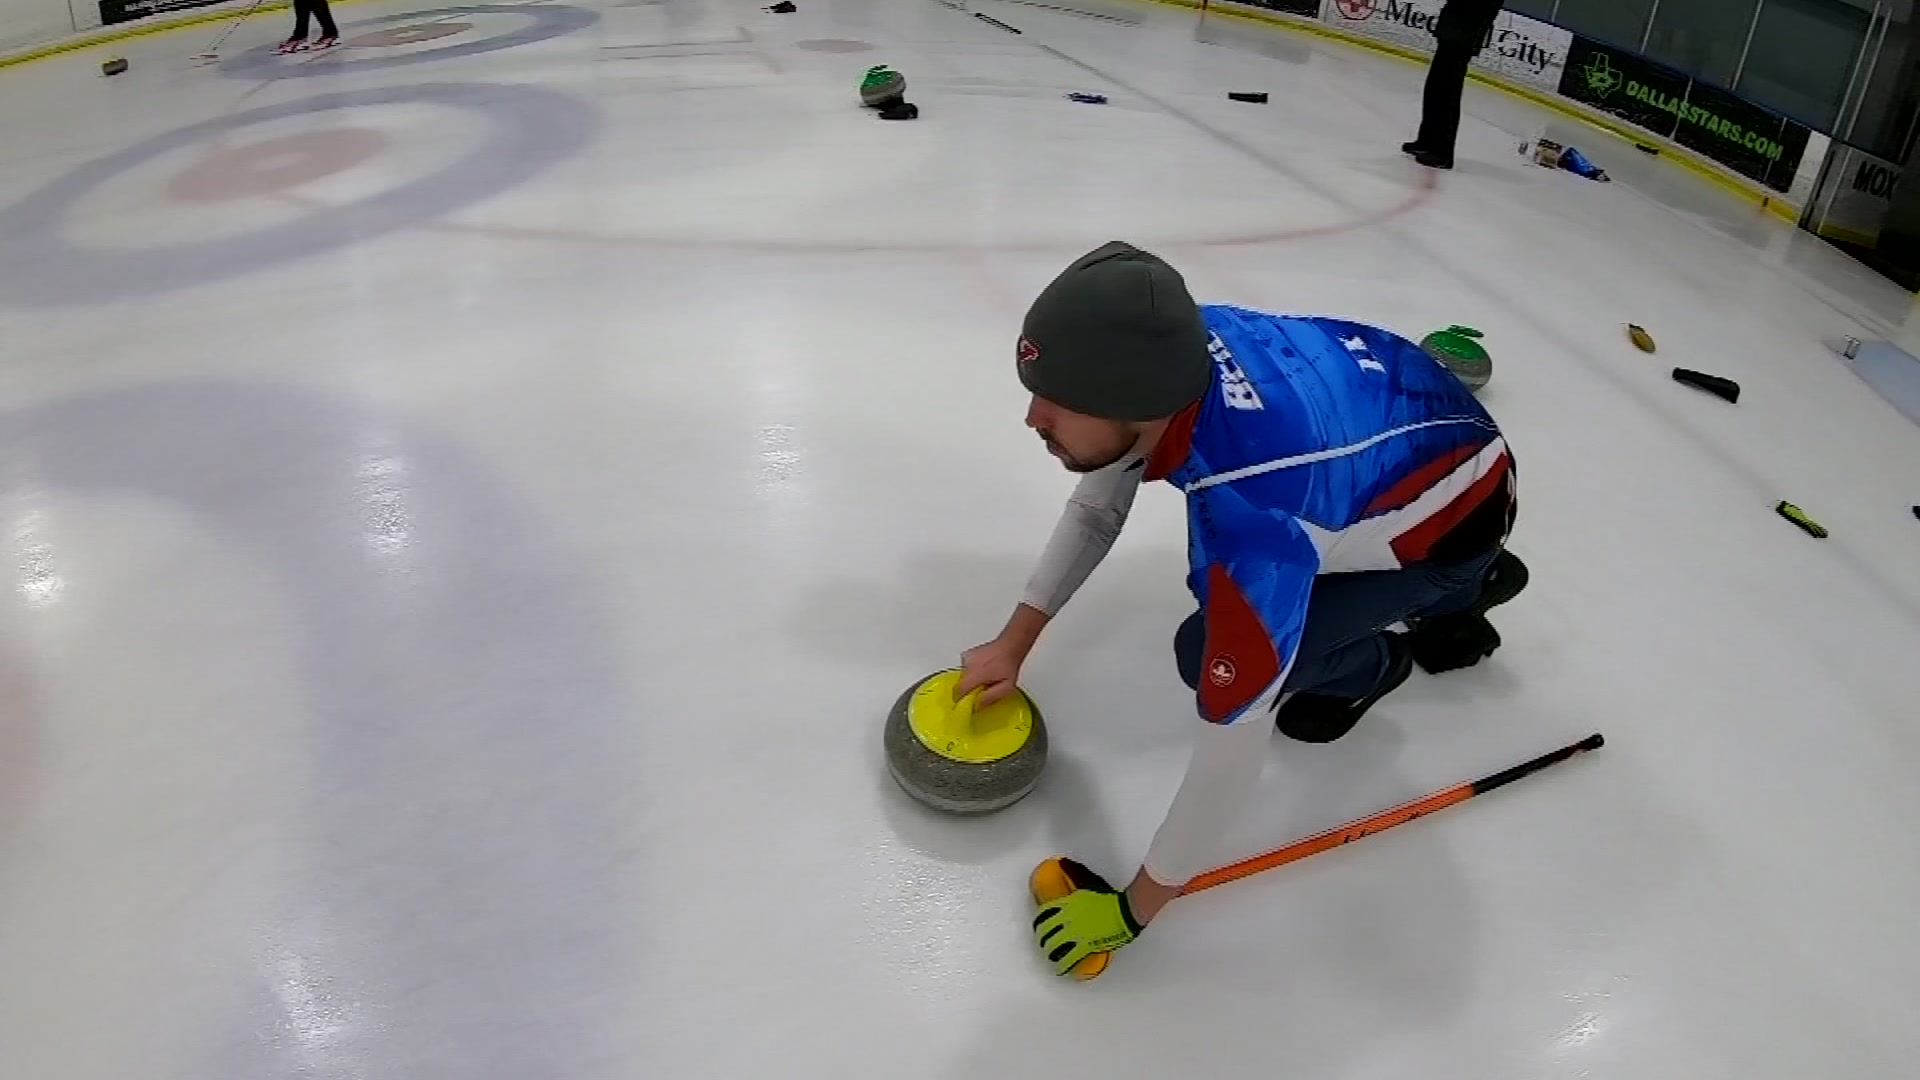 Local Curling Club Hopes More People Will Join Sport